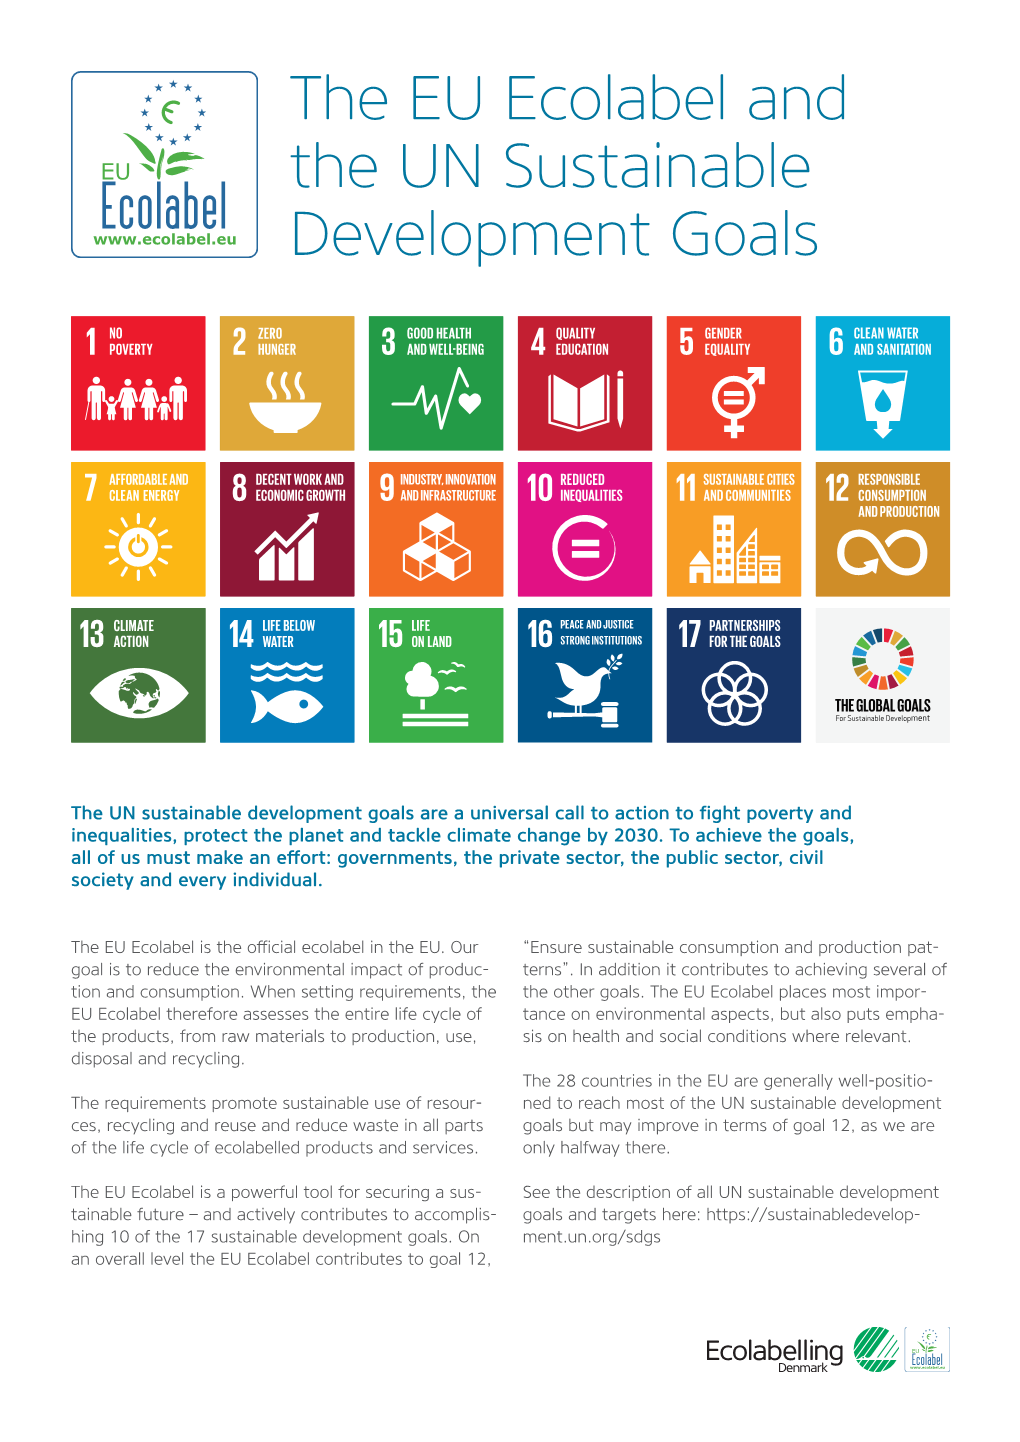 The EU Ecolabel and the UN Sustainable Development Goals